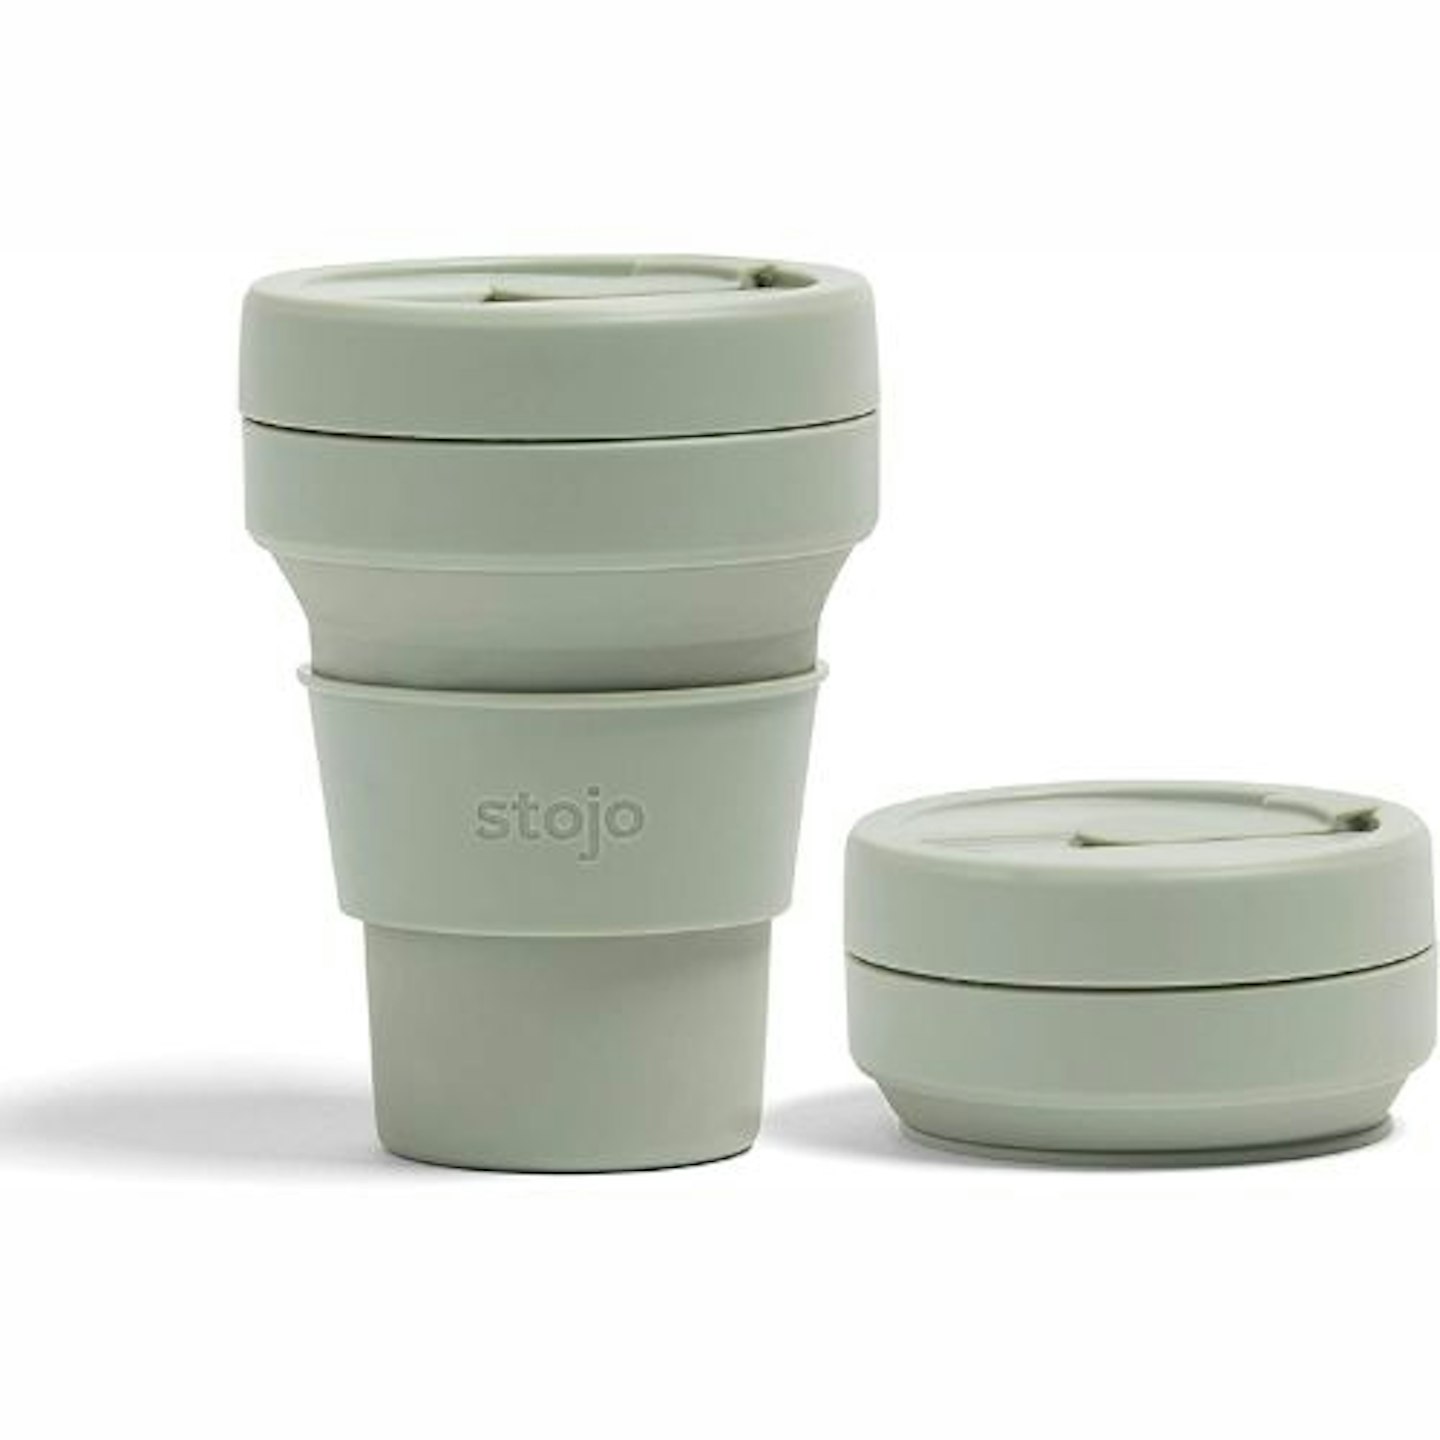 STOJO On-The-Go Collapsible Coffee Cup - 12oz / 355ml